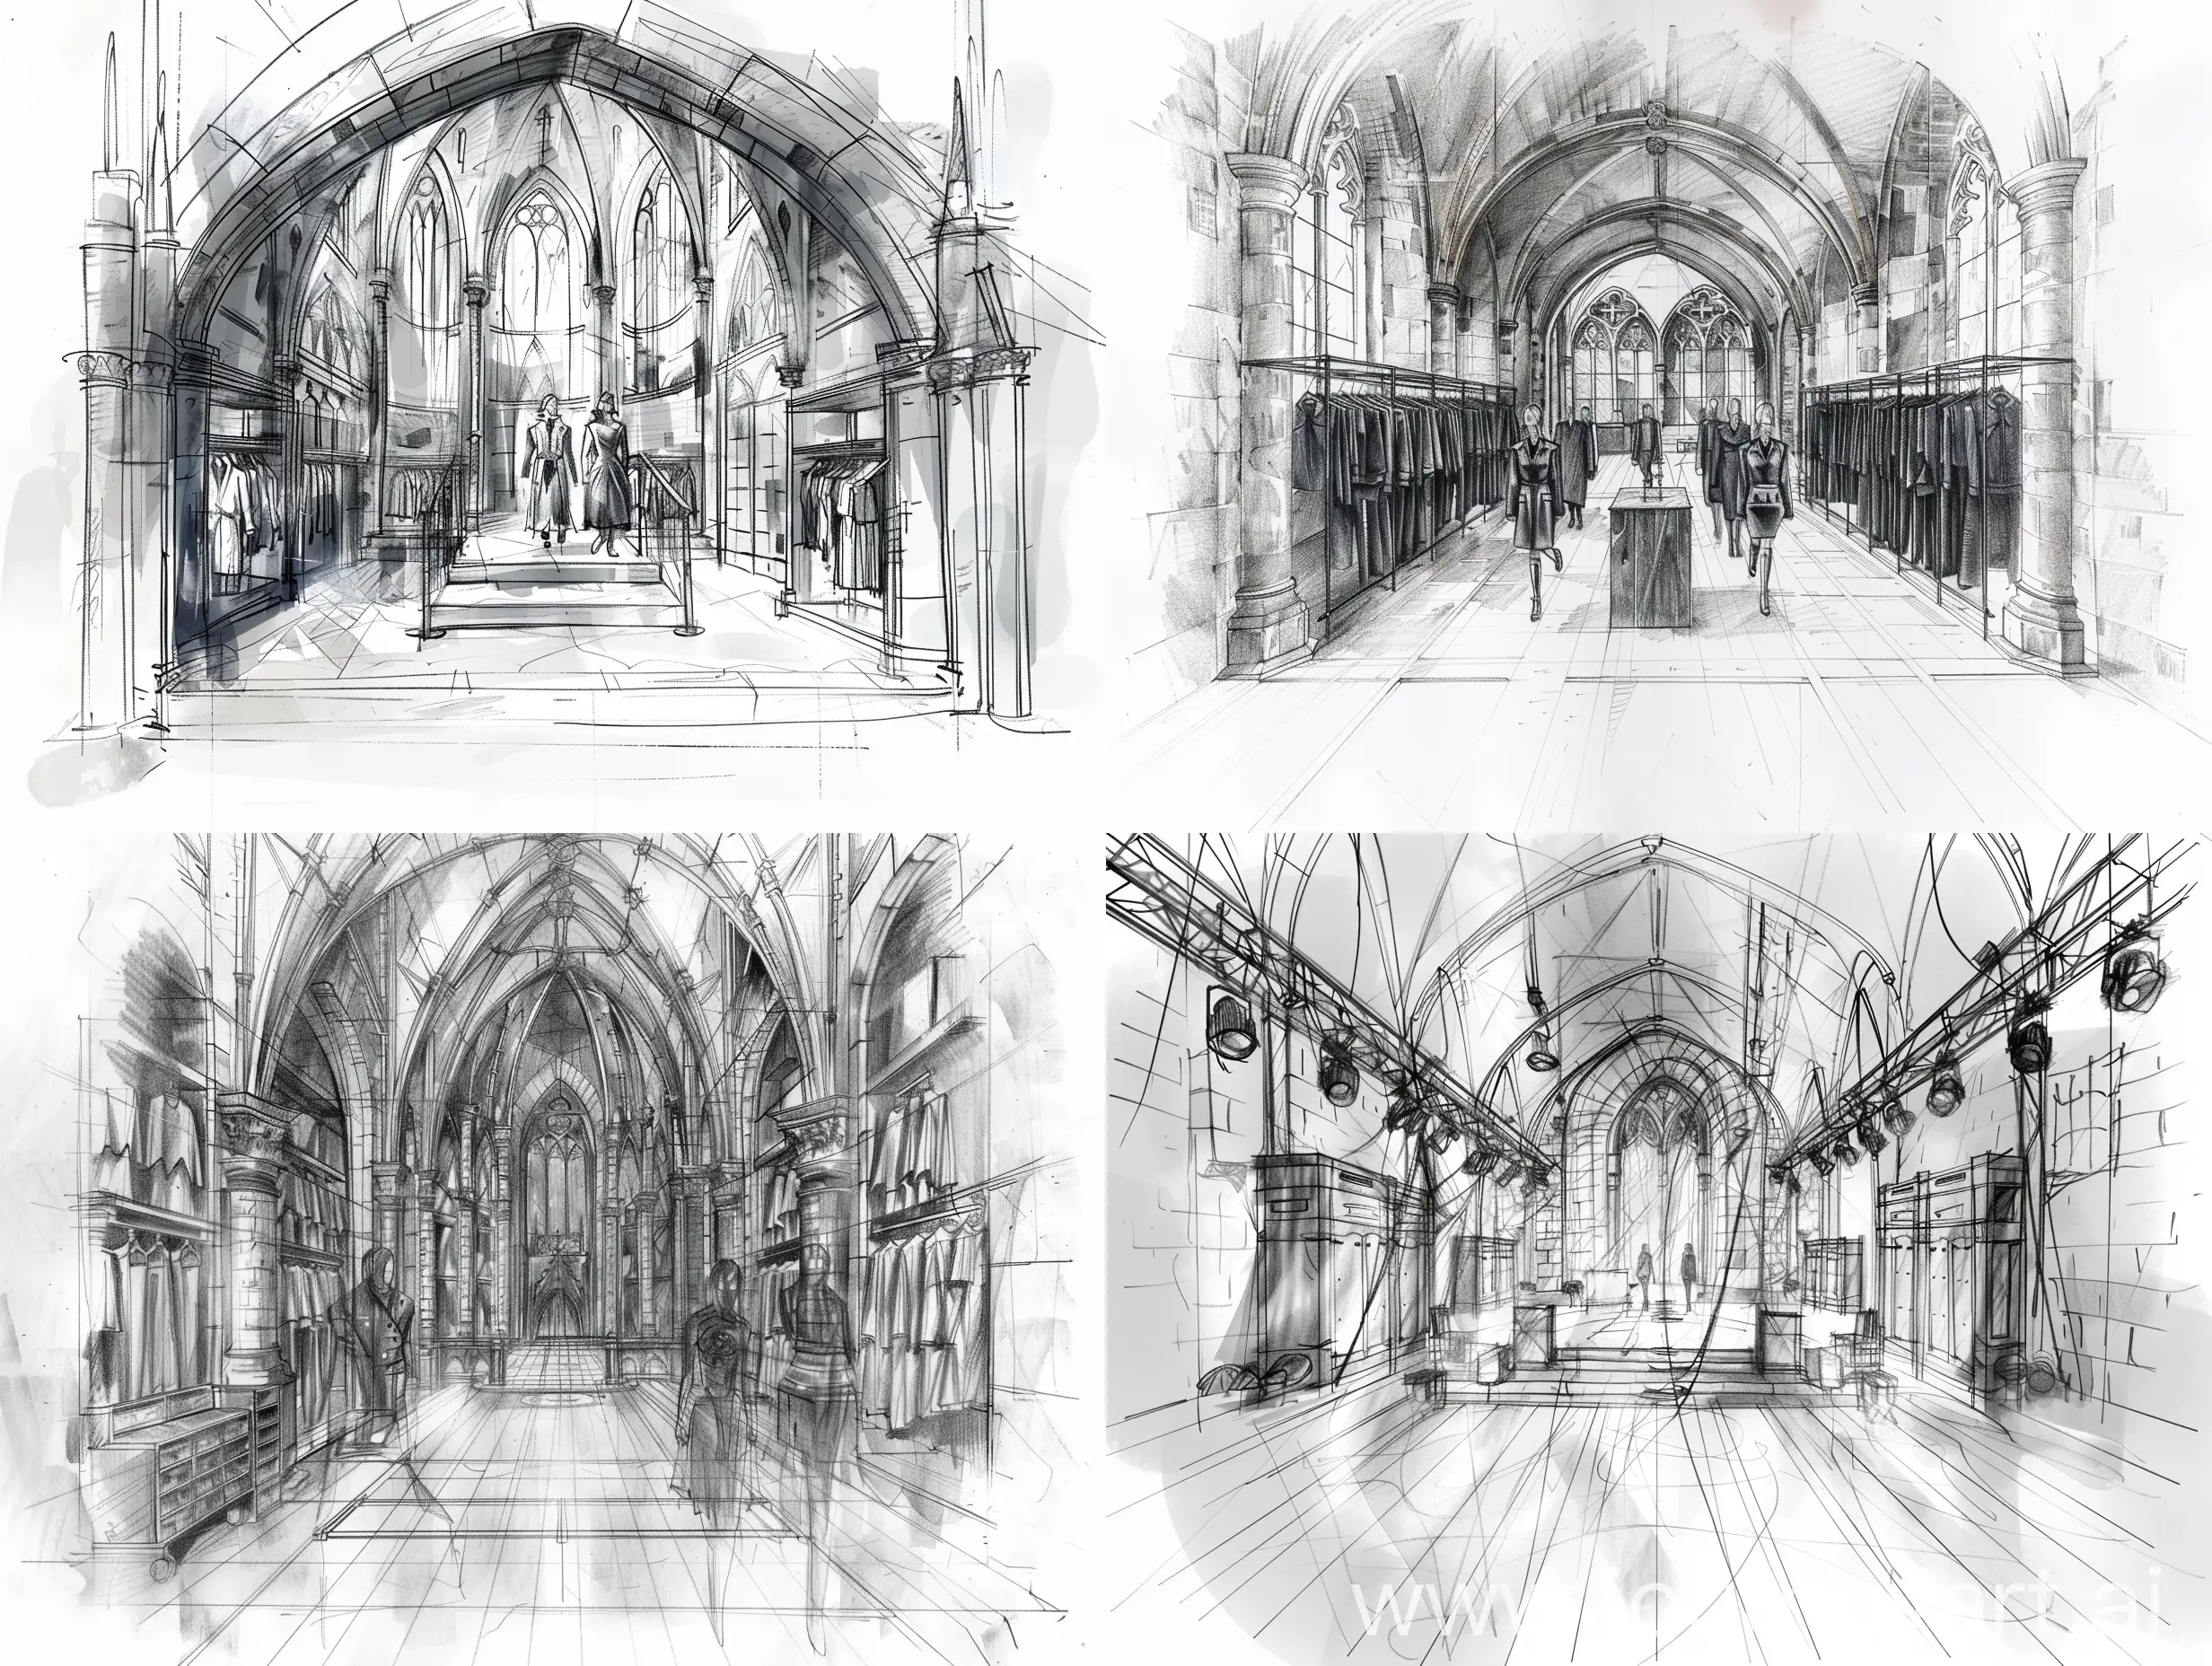 Fashion-Show-Models-in-Gothic-Cathedral-Setting-with-Leather-Clothing-Sketch